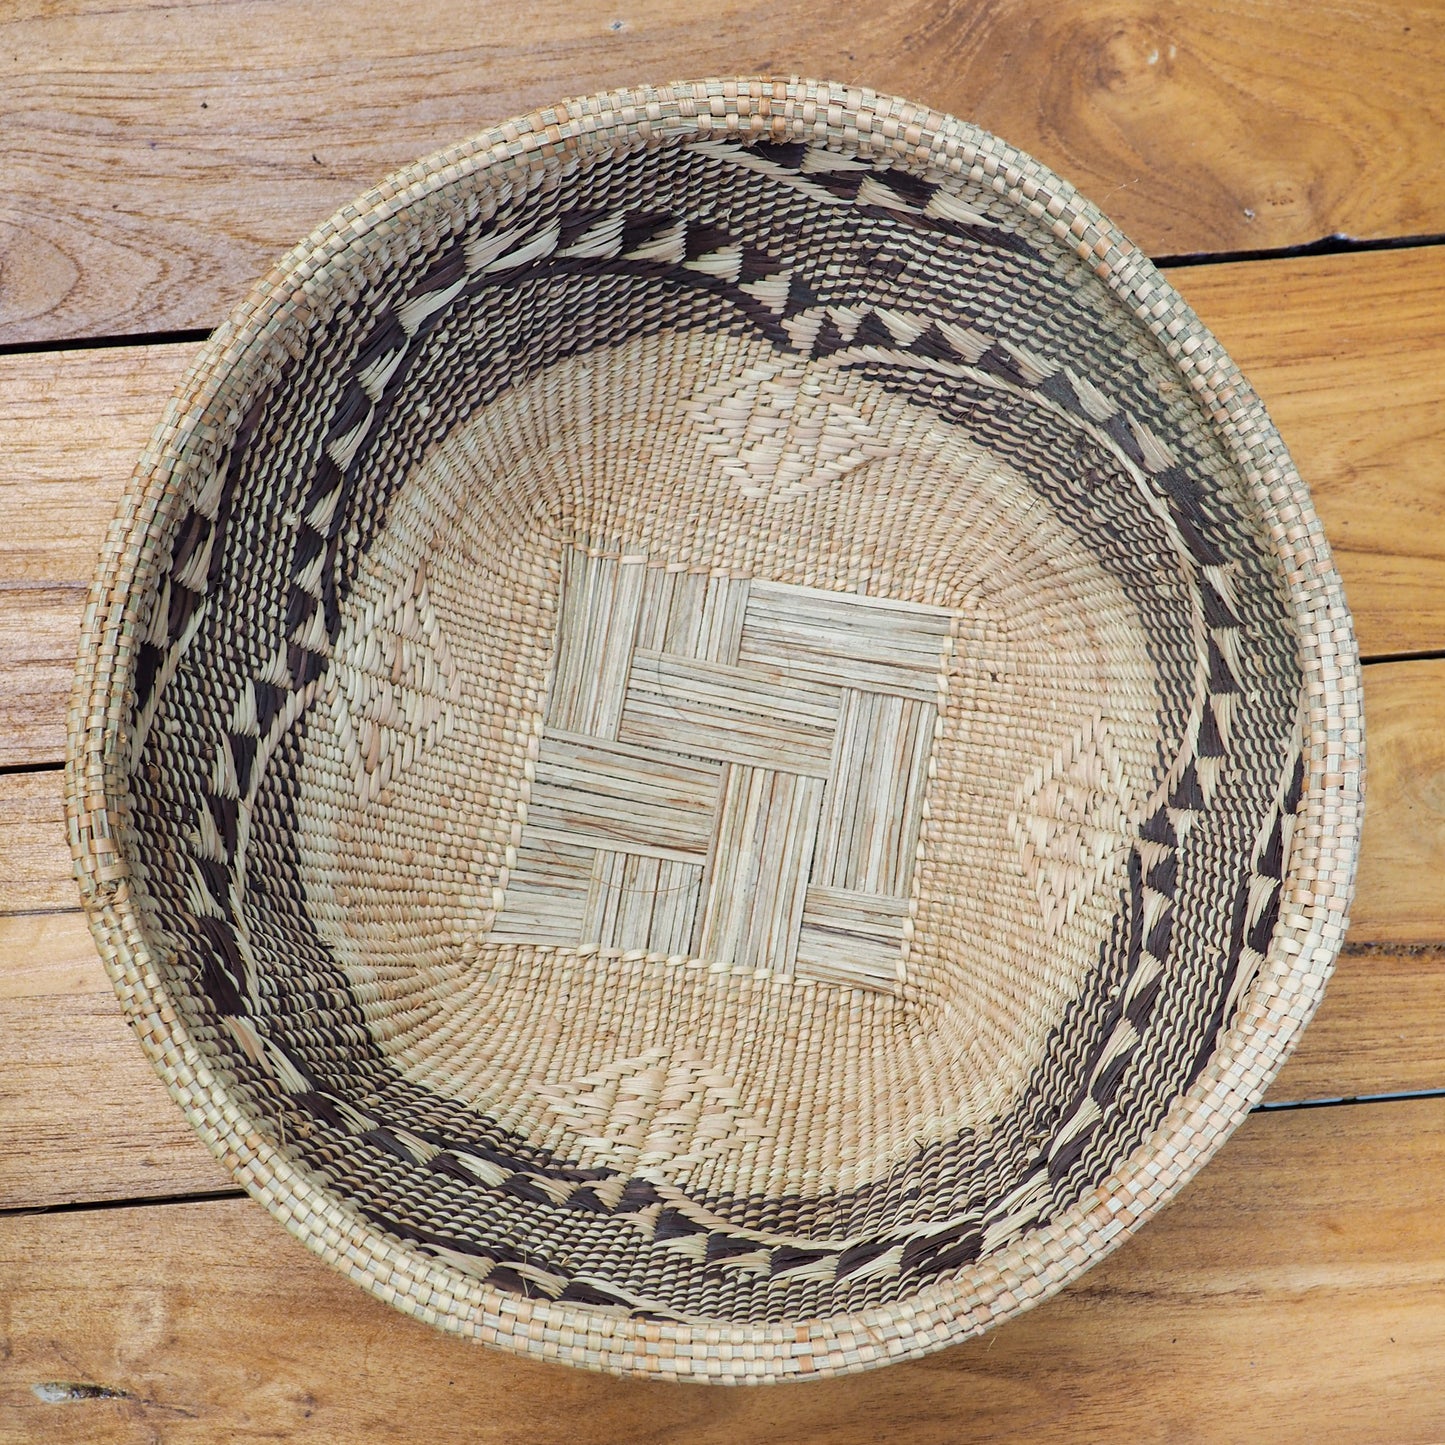 Handwoven Wall Bowl - Large